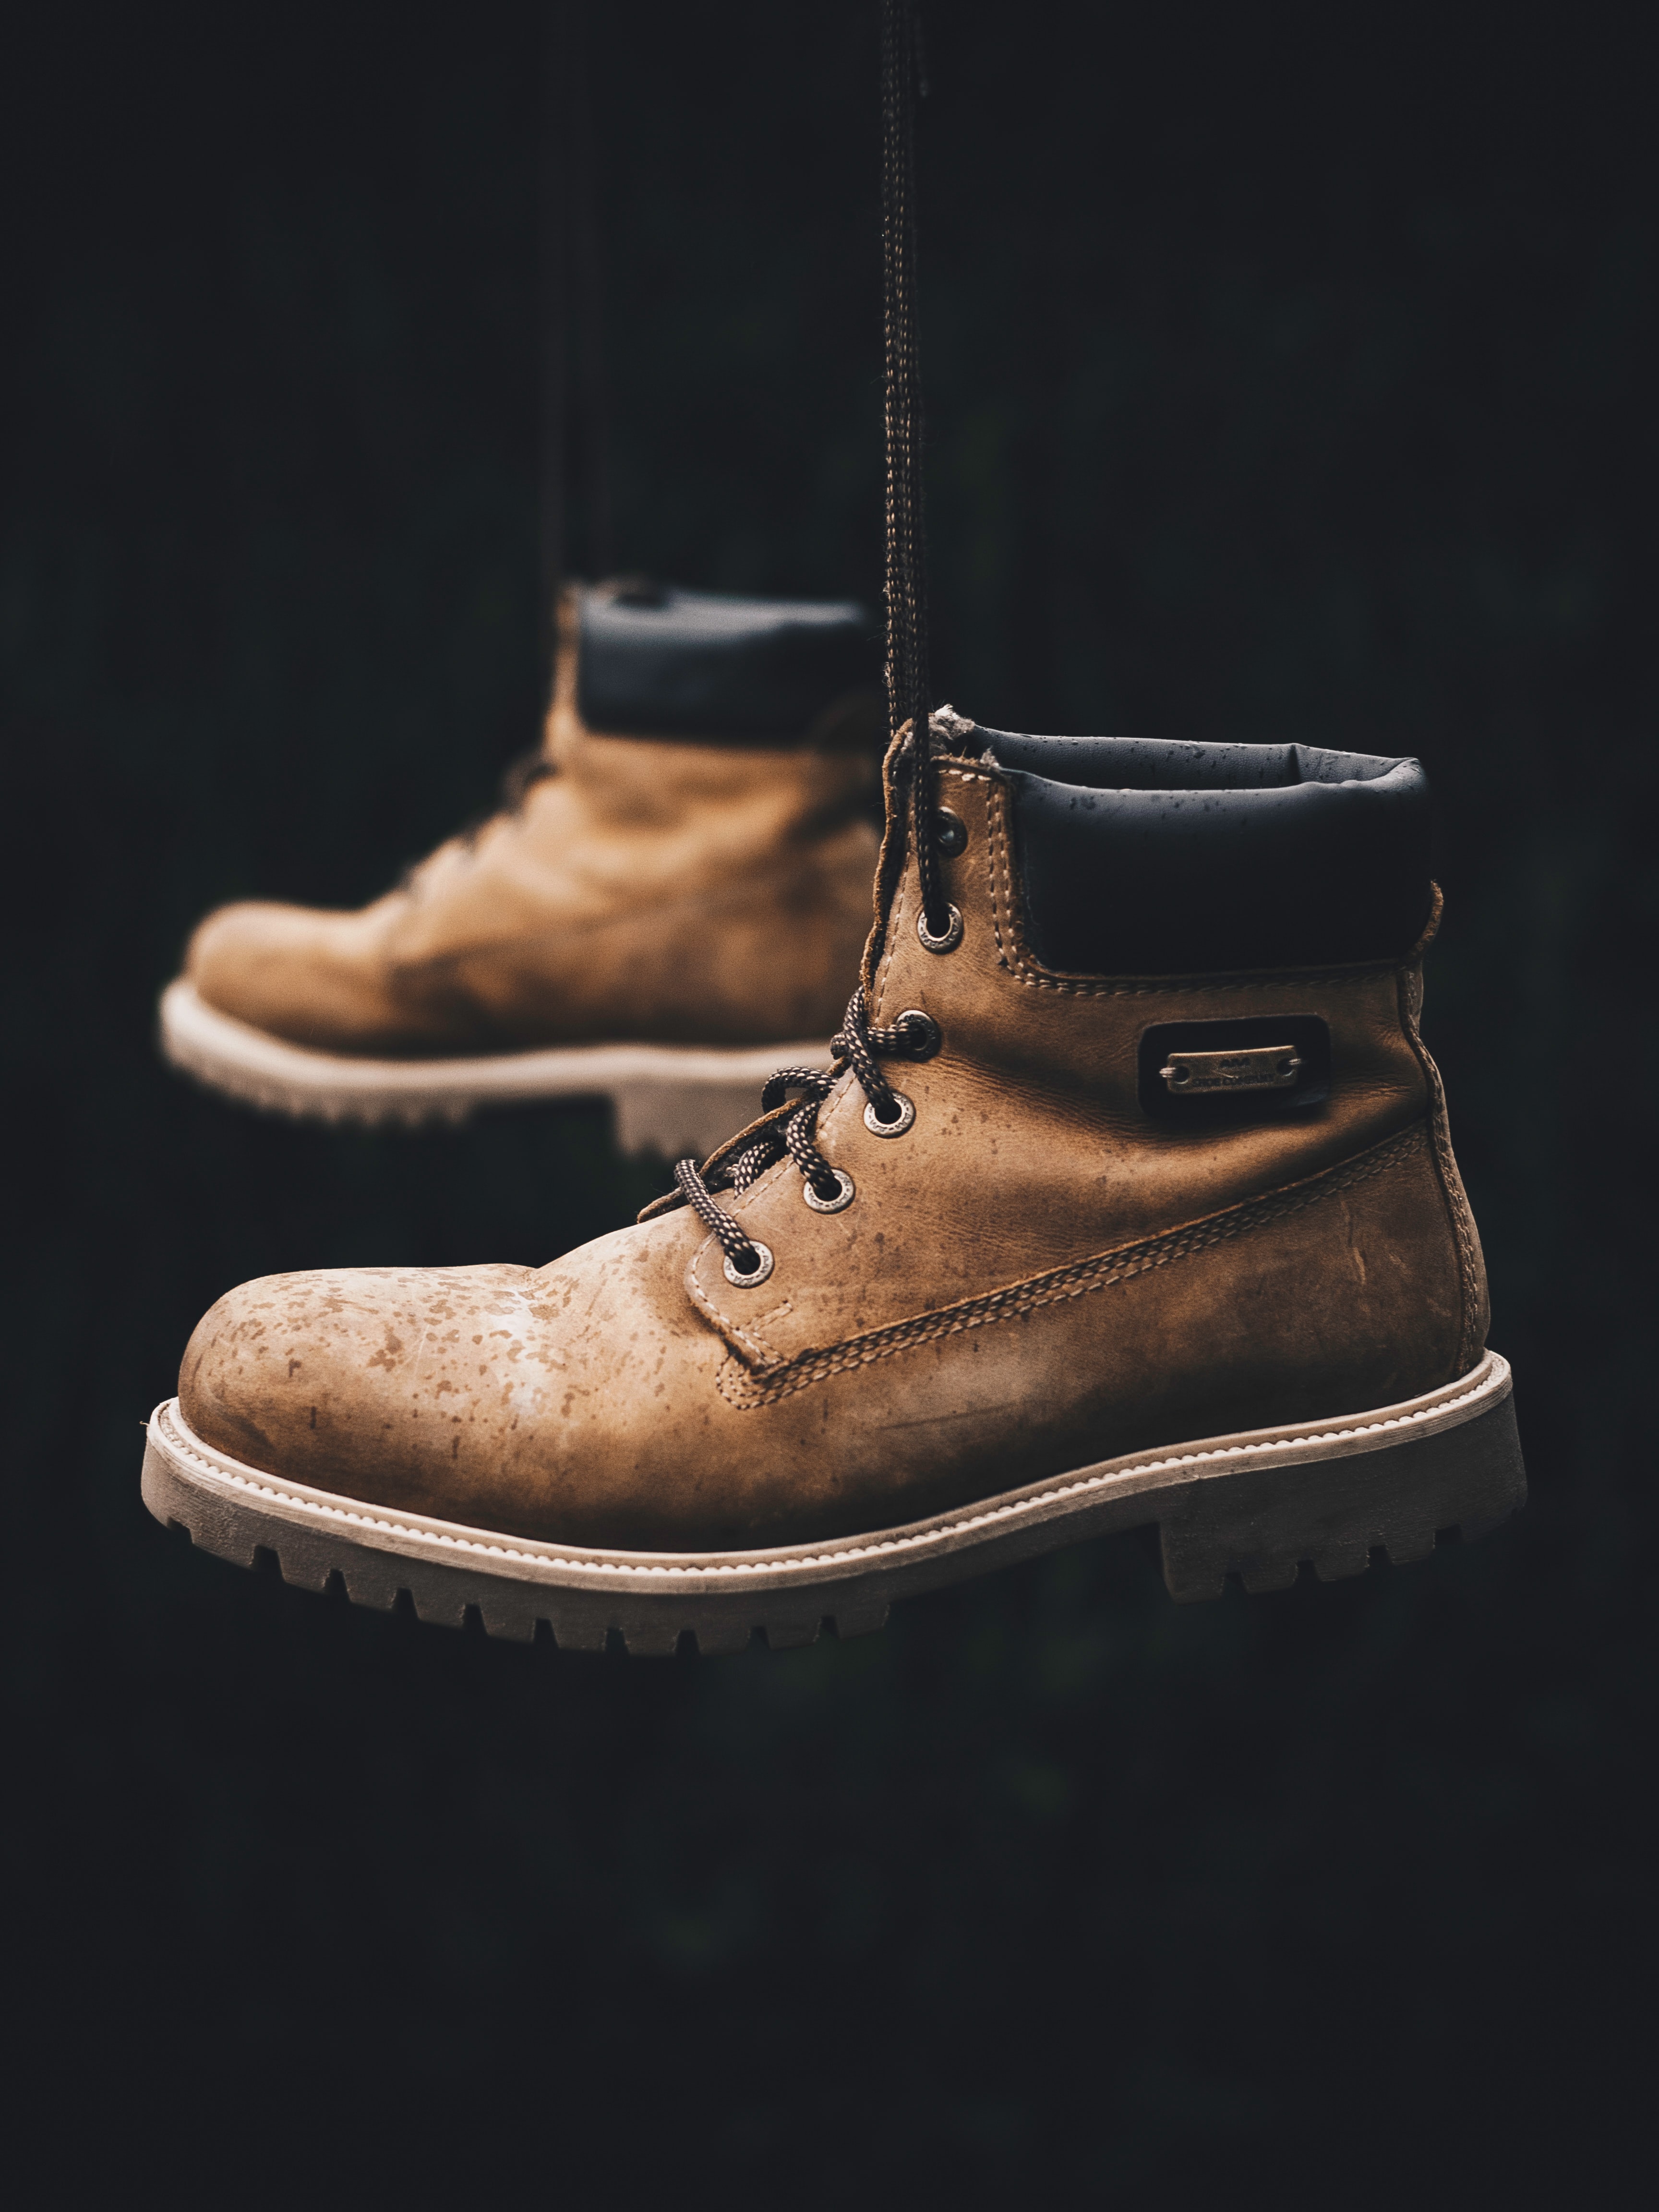 How to Care for Leather Boots